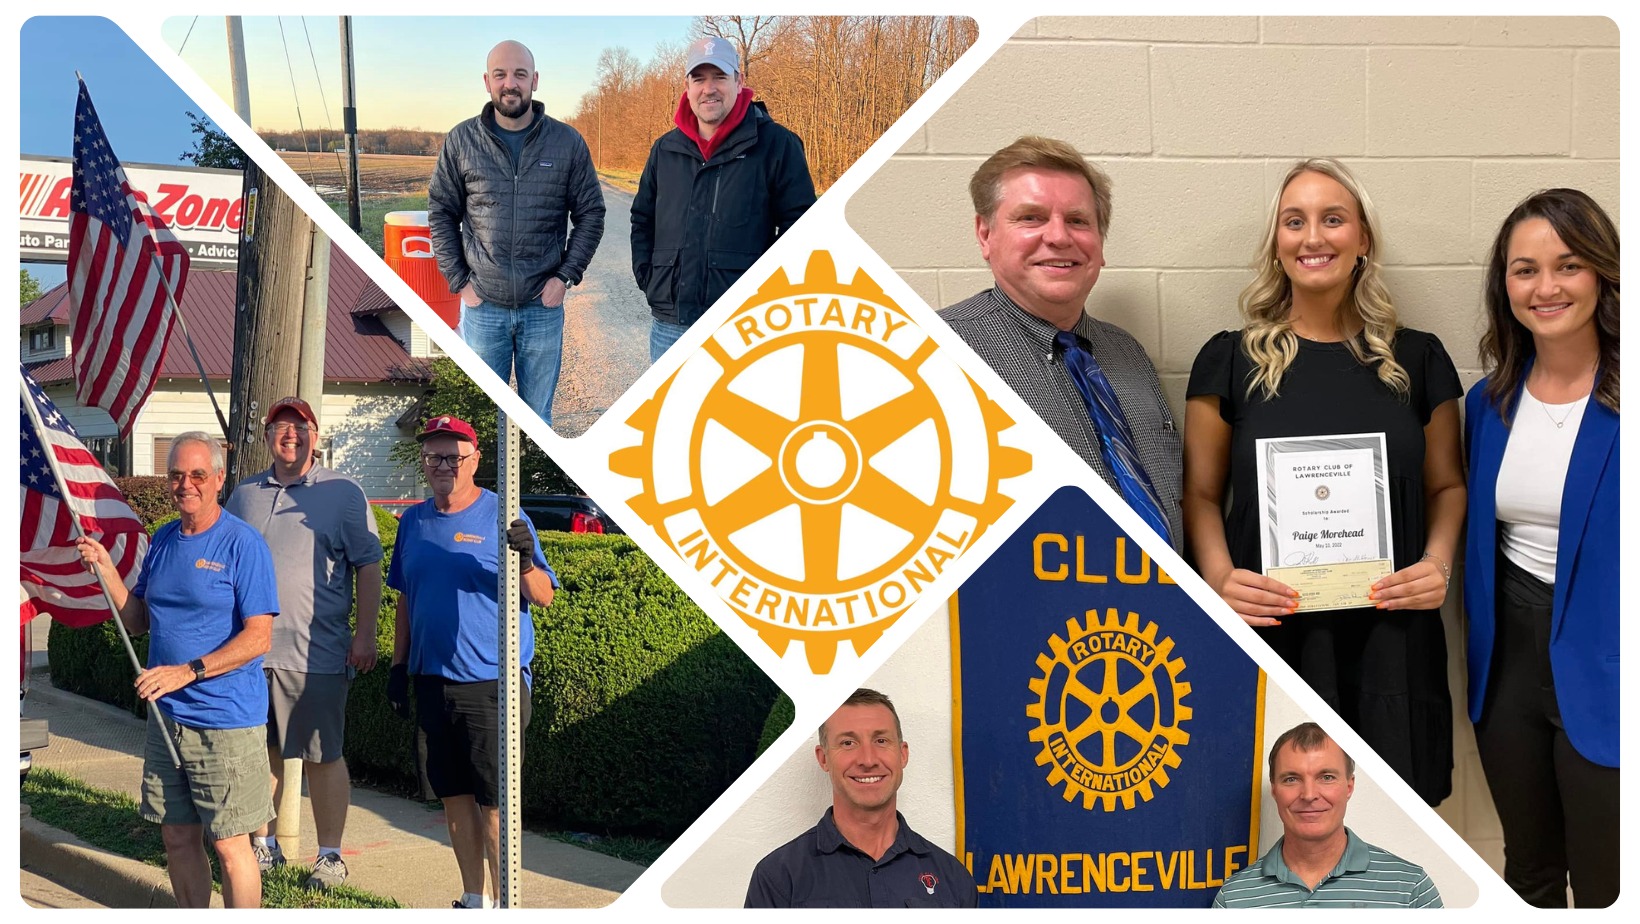 Rotary Club of Lawrenceville Club # 3320 